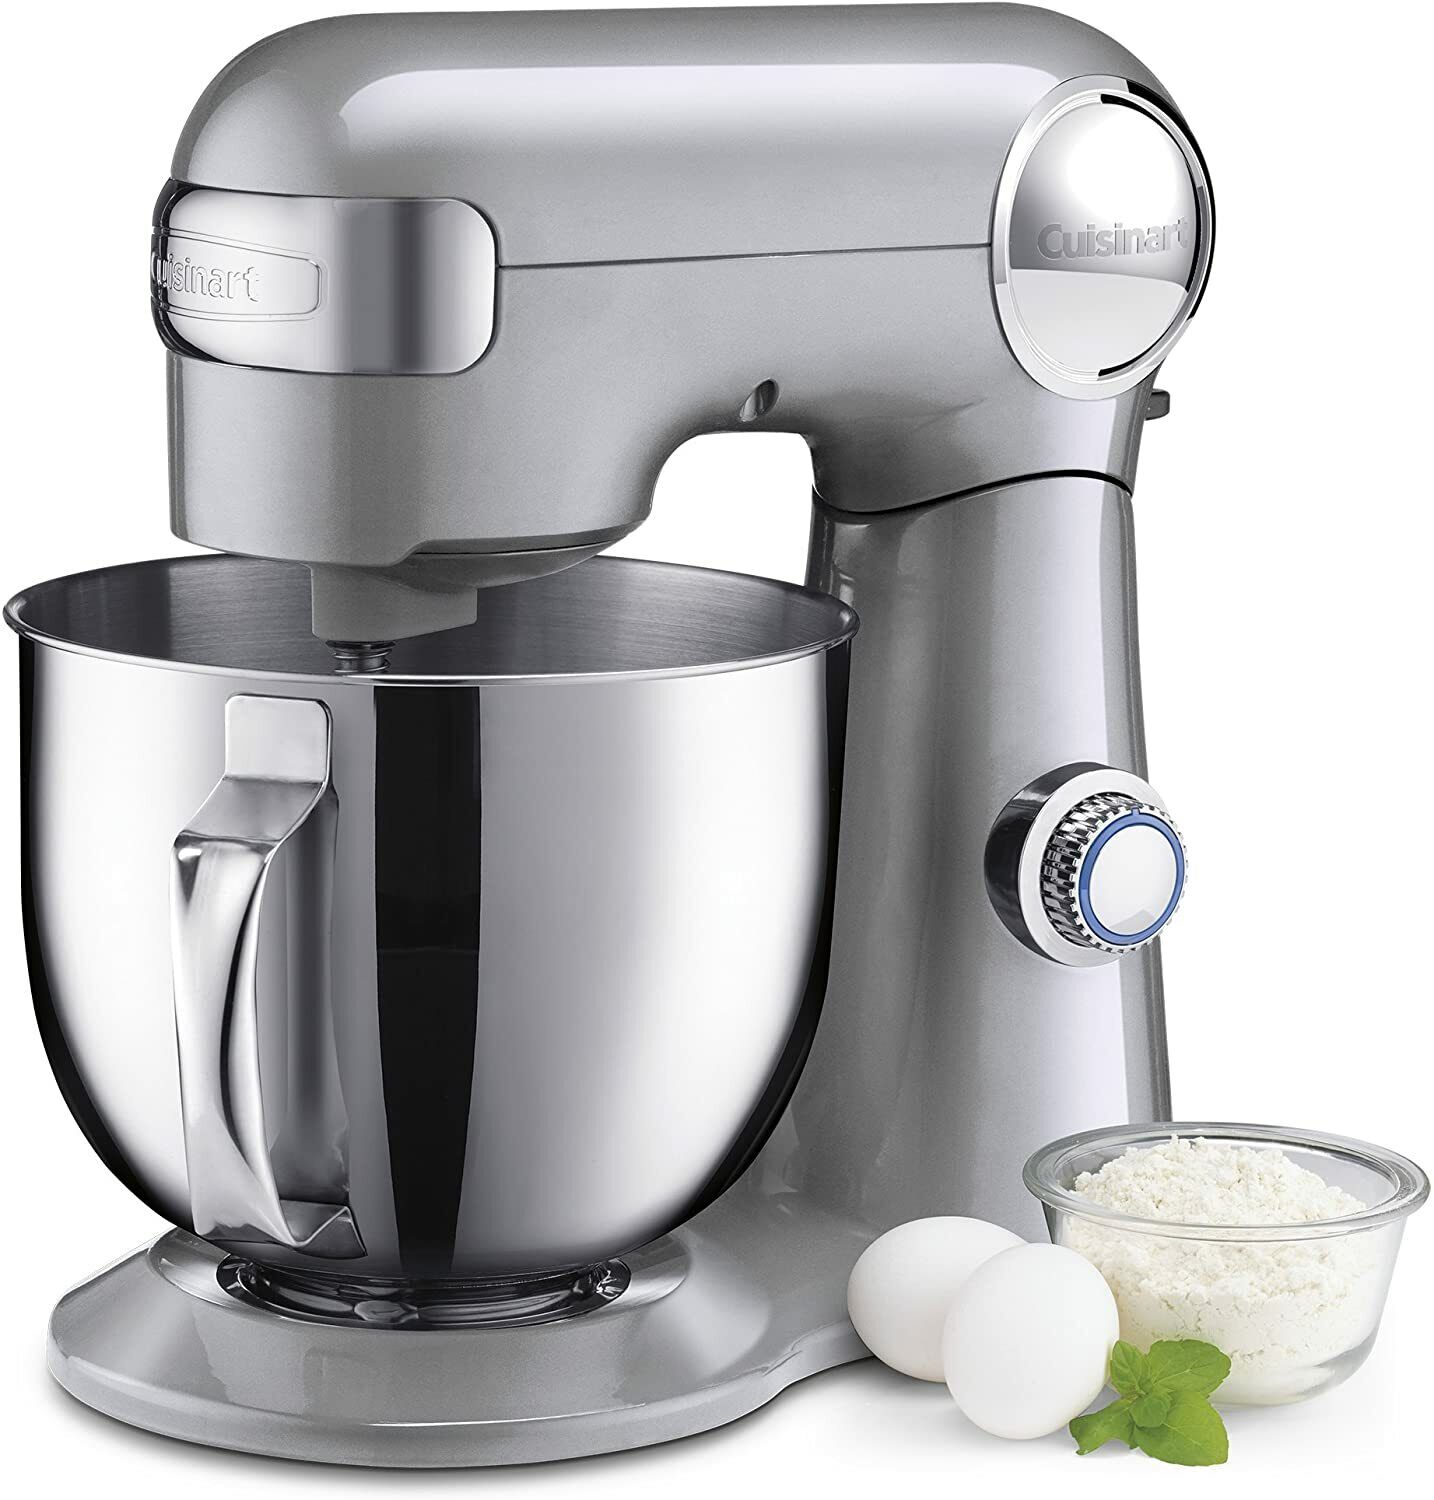 Cuisinart Precision Master 5.5-Quart 12-Speed Stand Mixer - Silver Lining